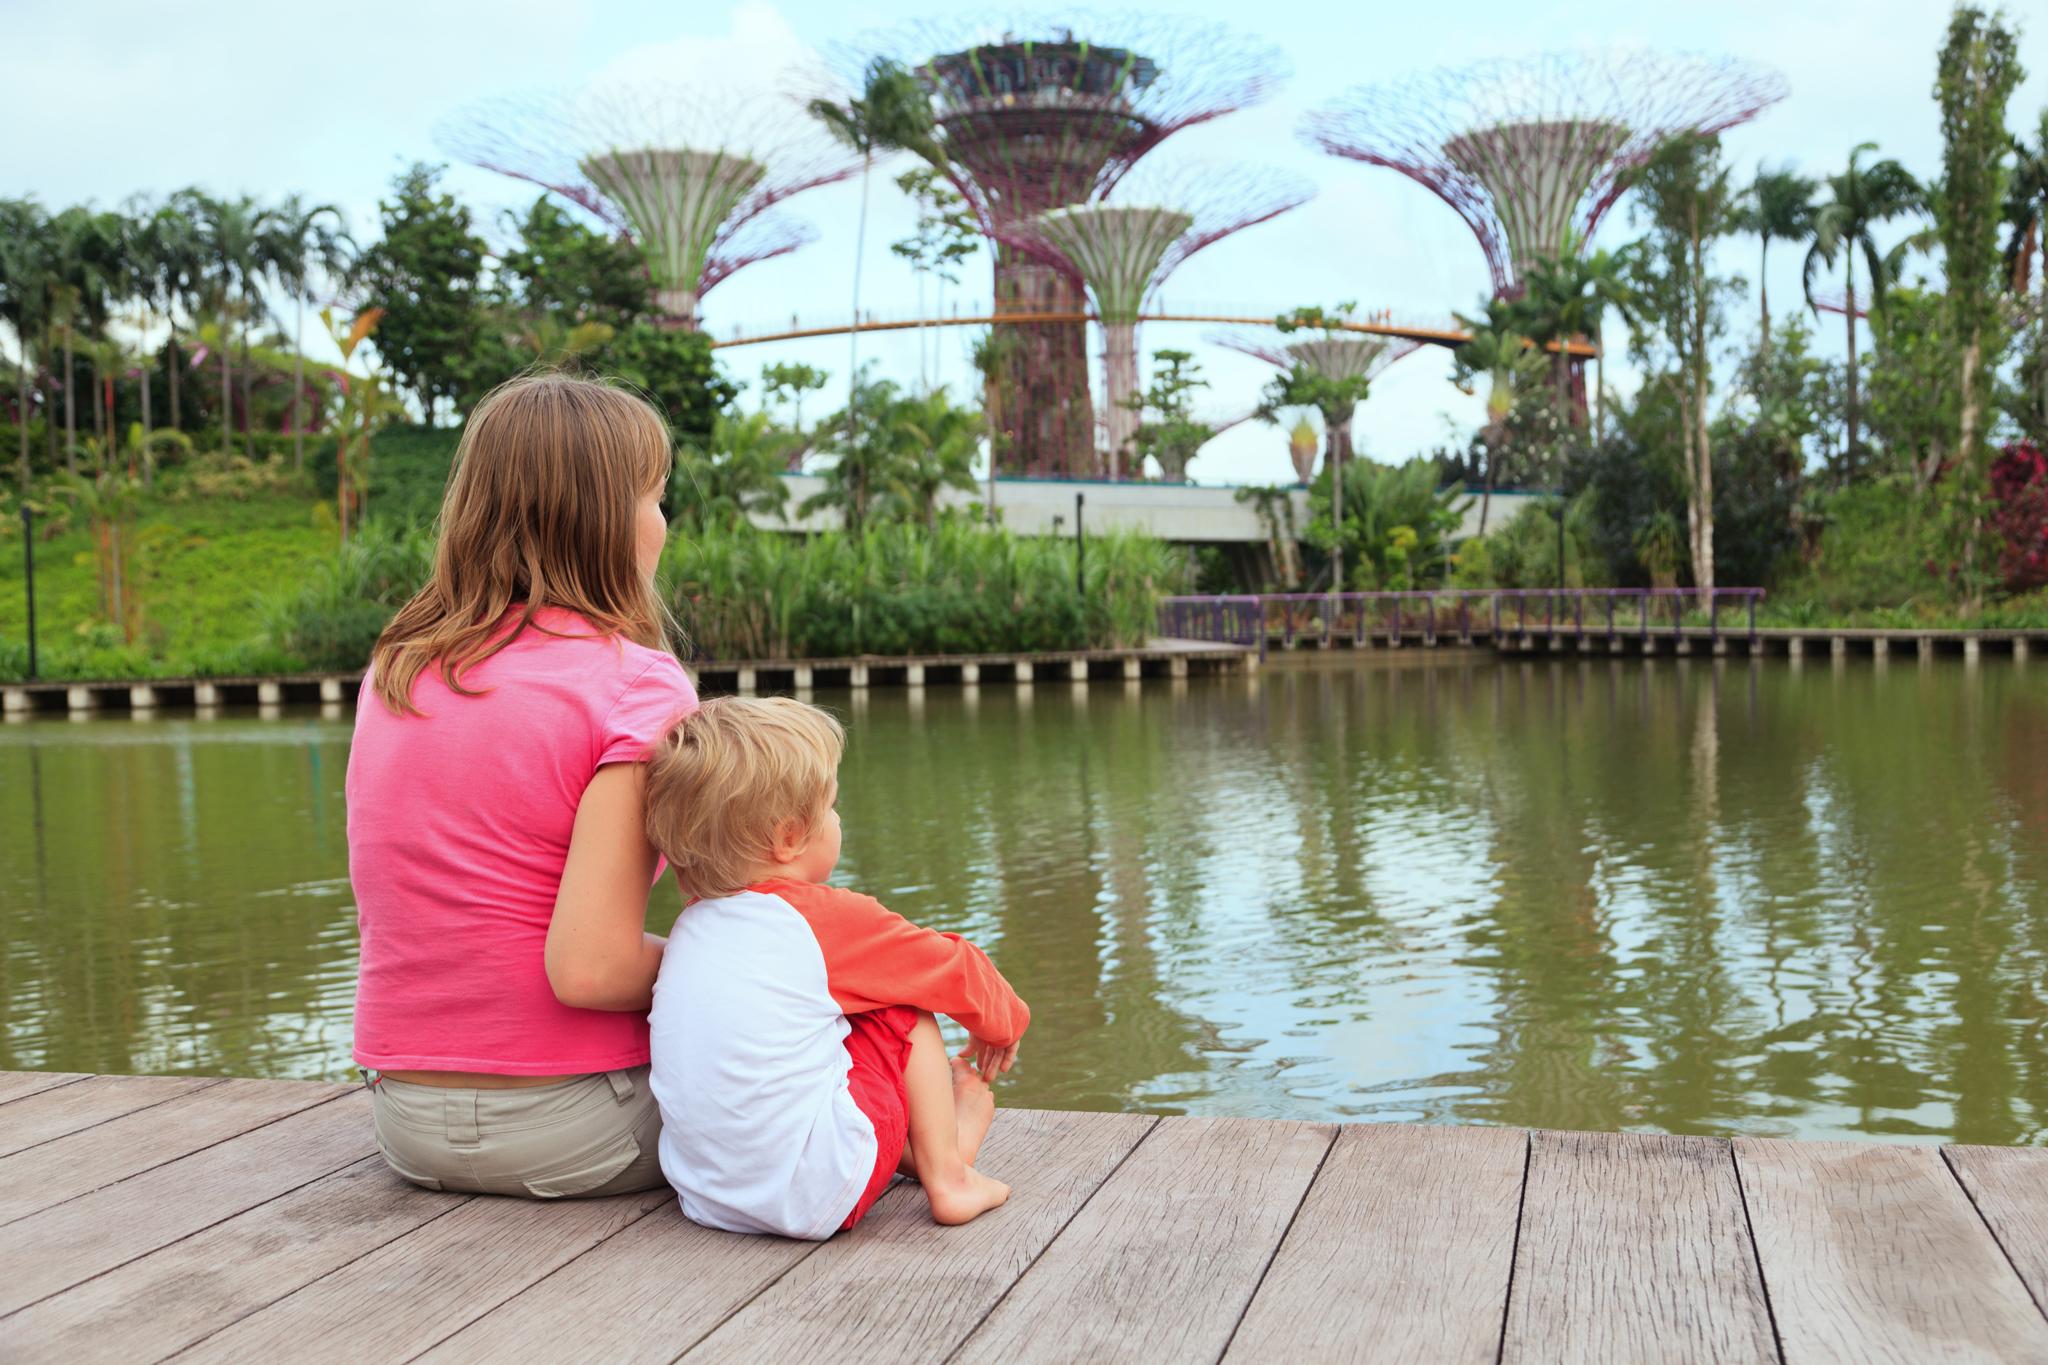 The Gardens by the Bay have impressively huge "supertrees"